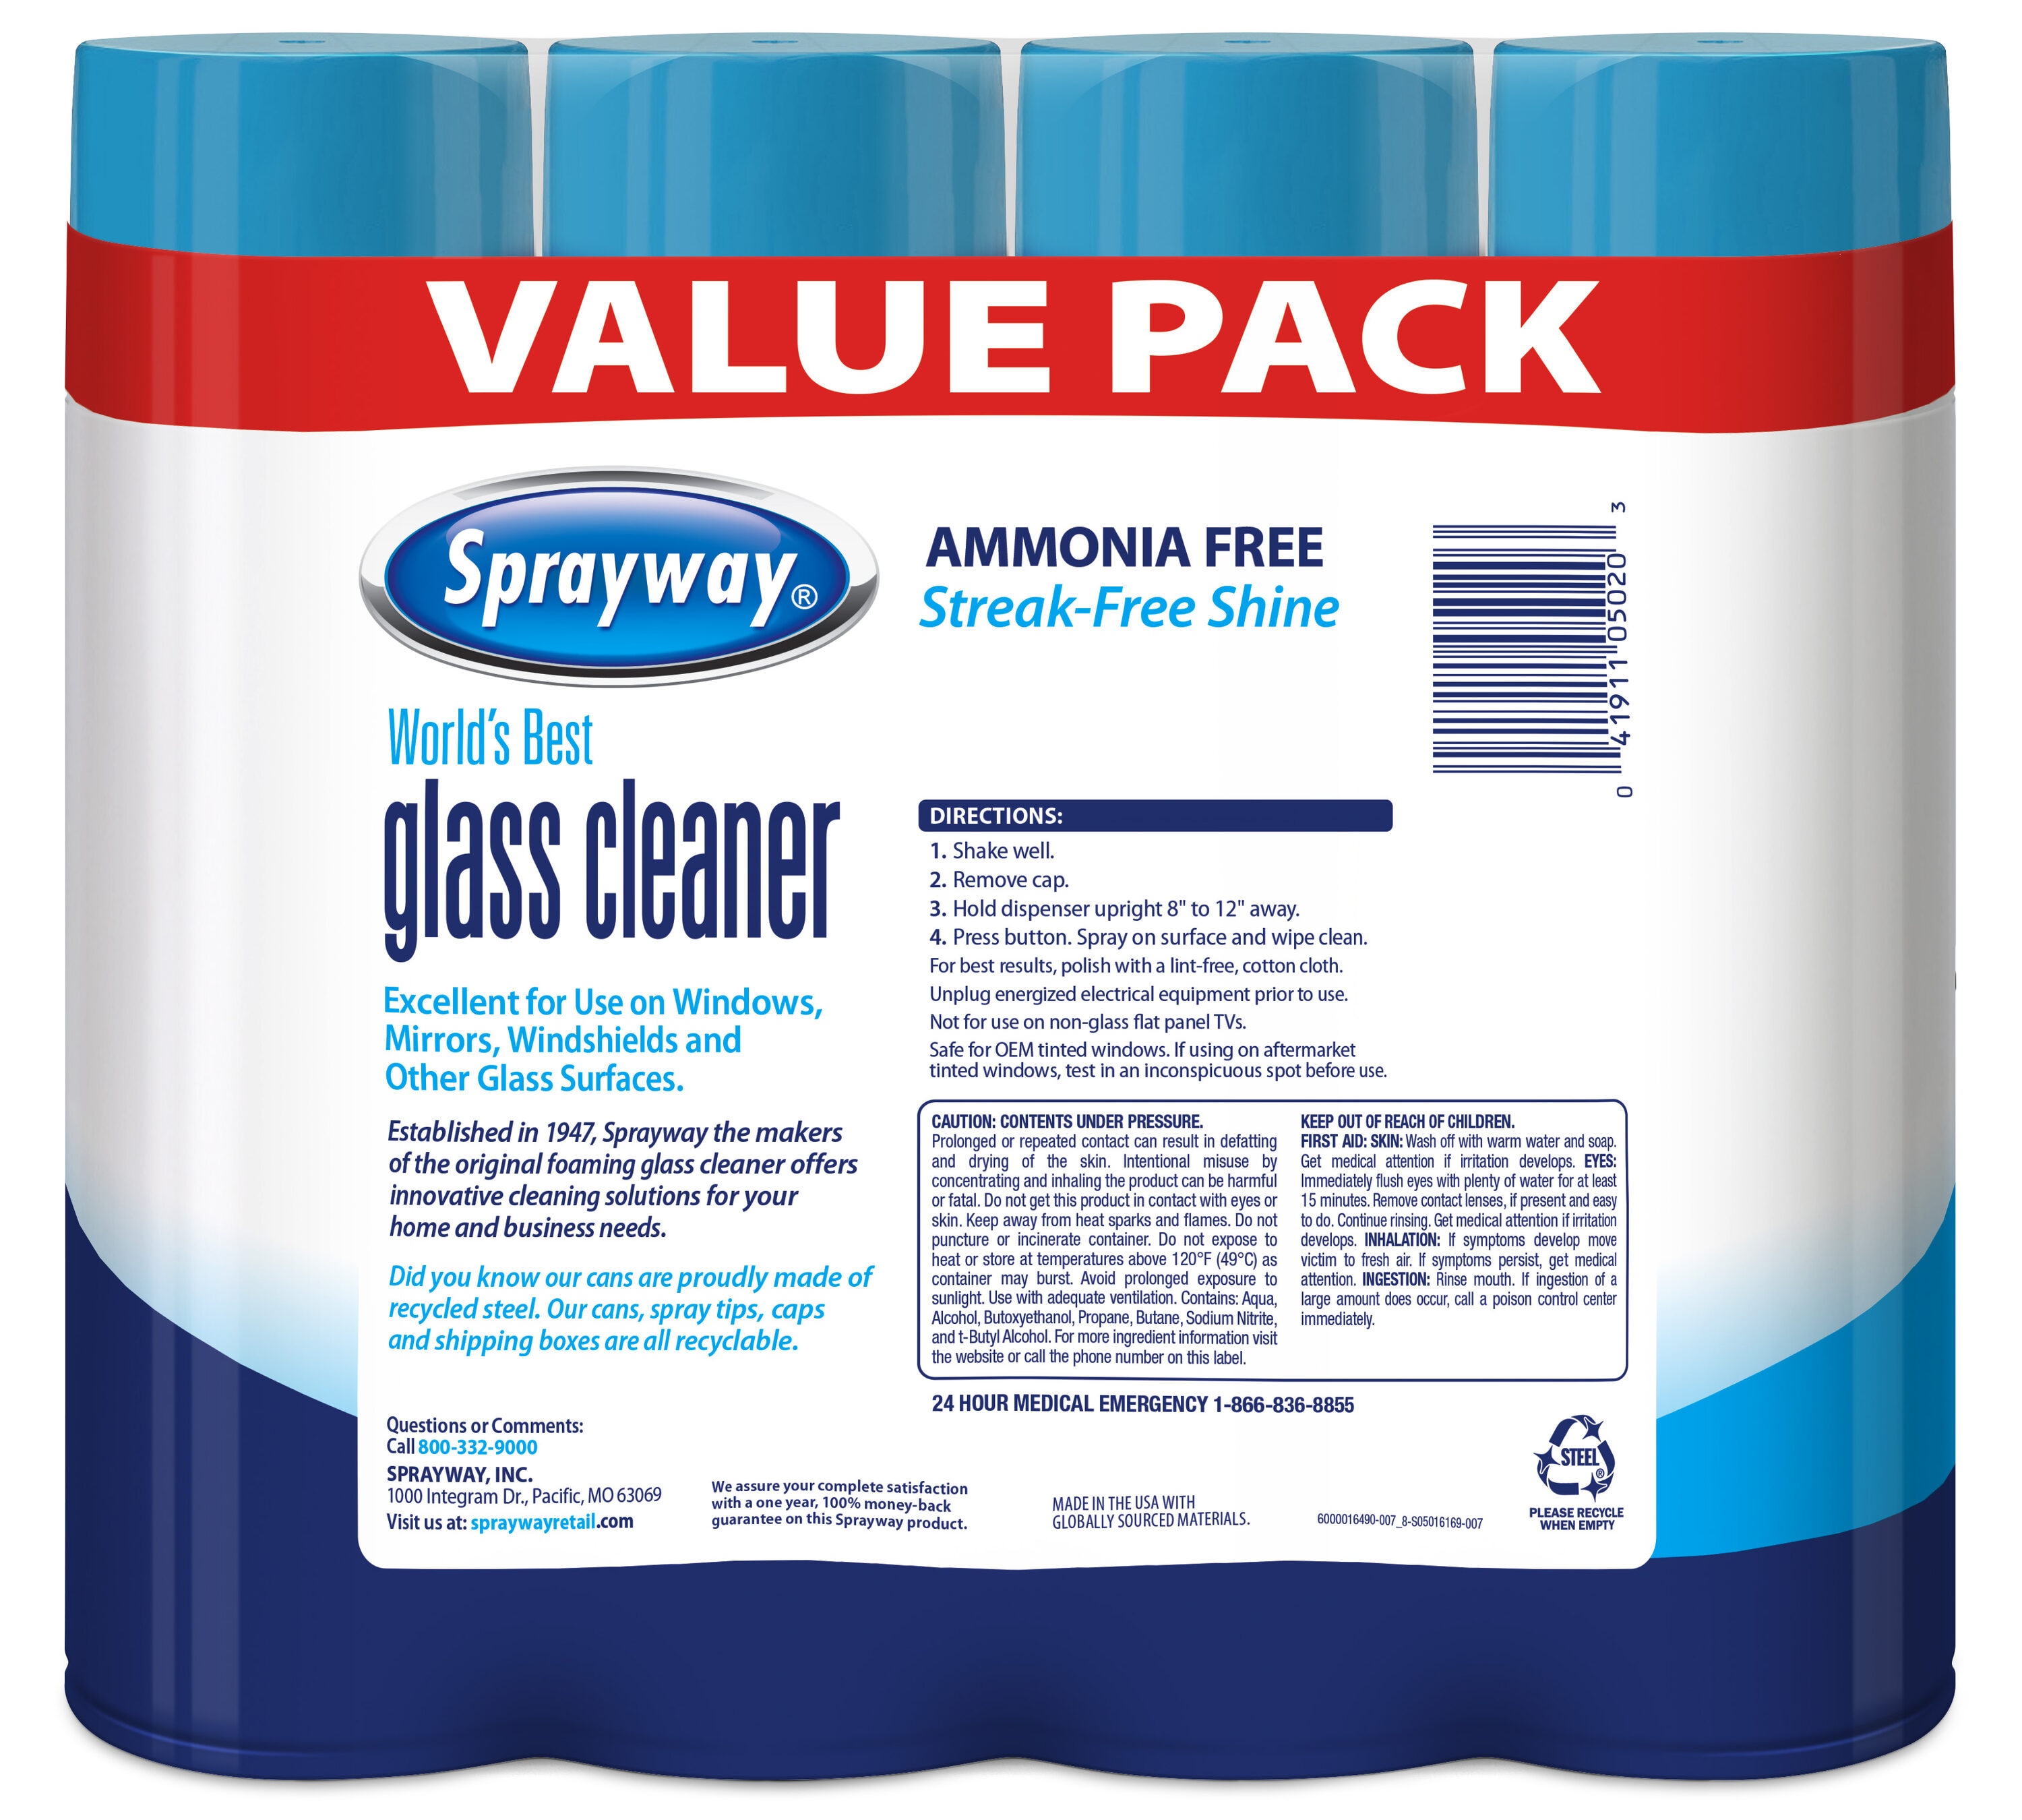 Sprayway 23 oz Glass Cleaner Foaming Action New 3-Pack Free Shipping